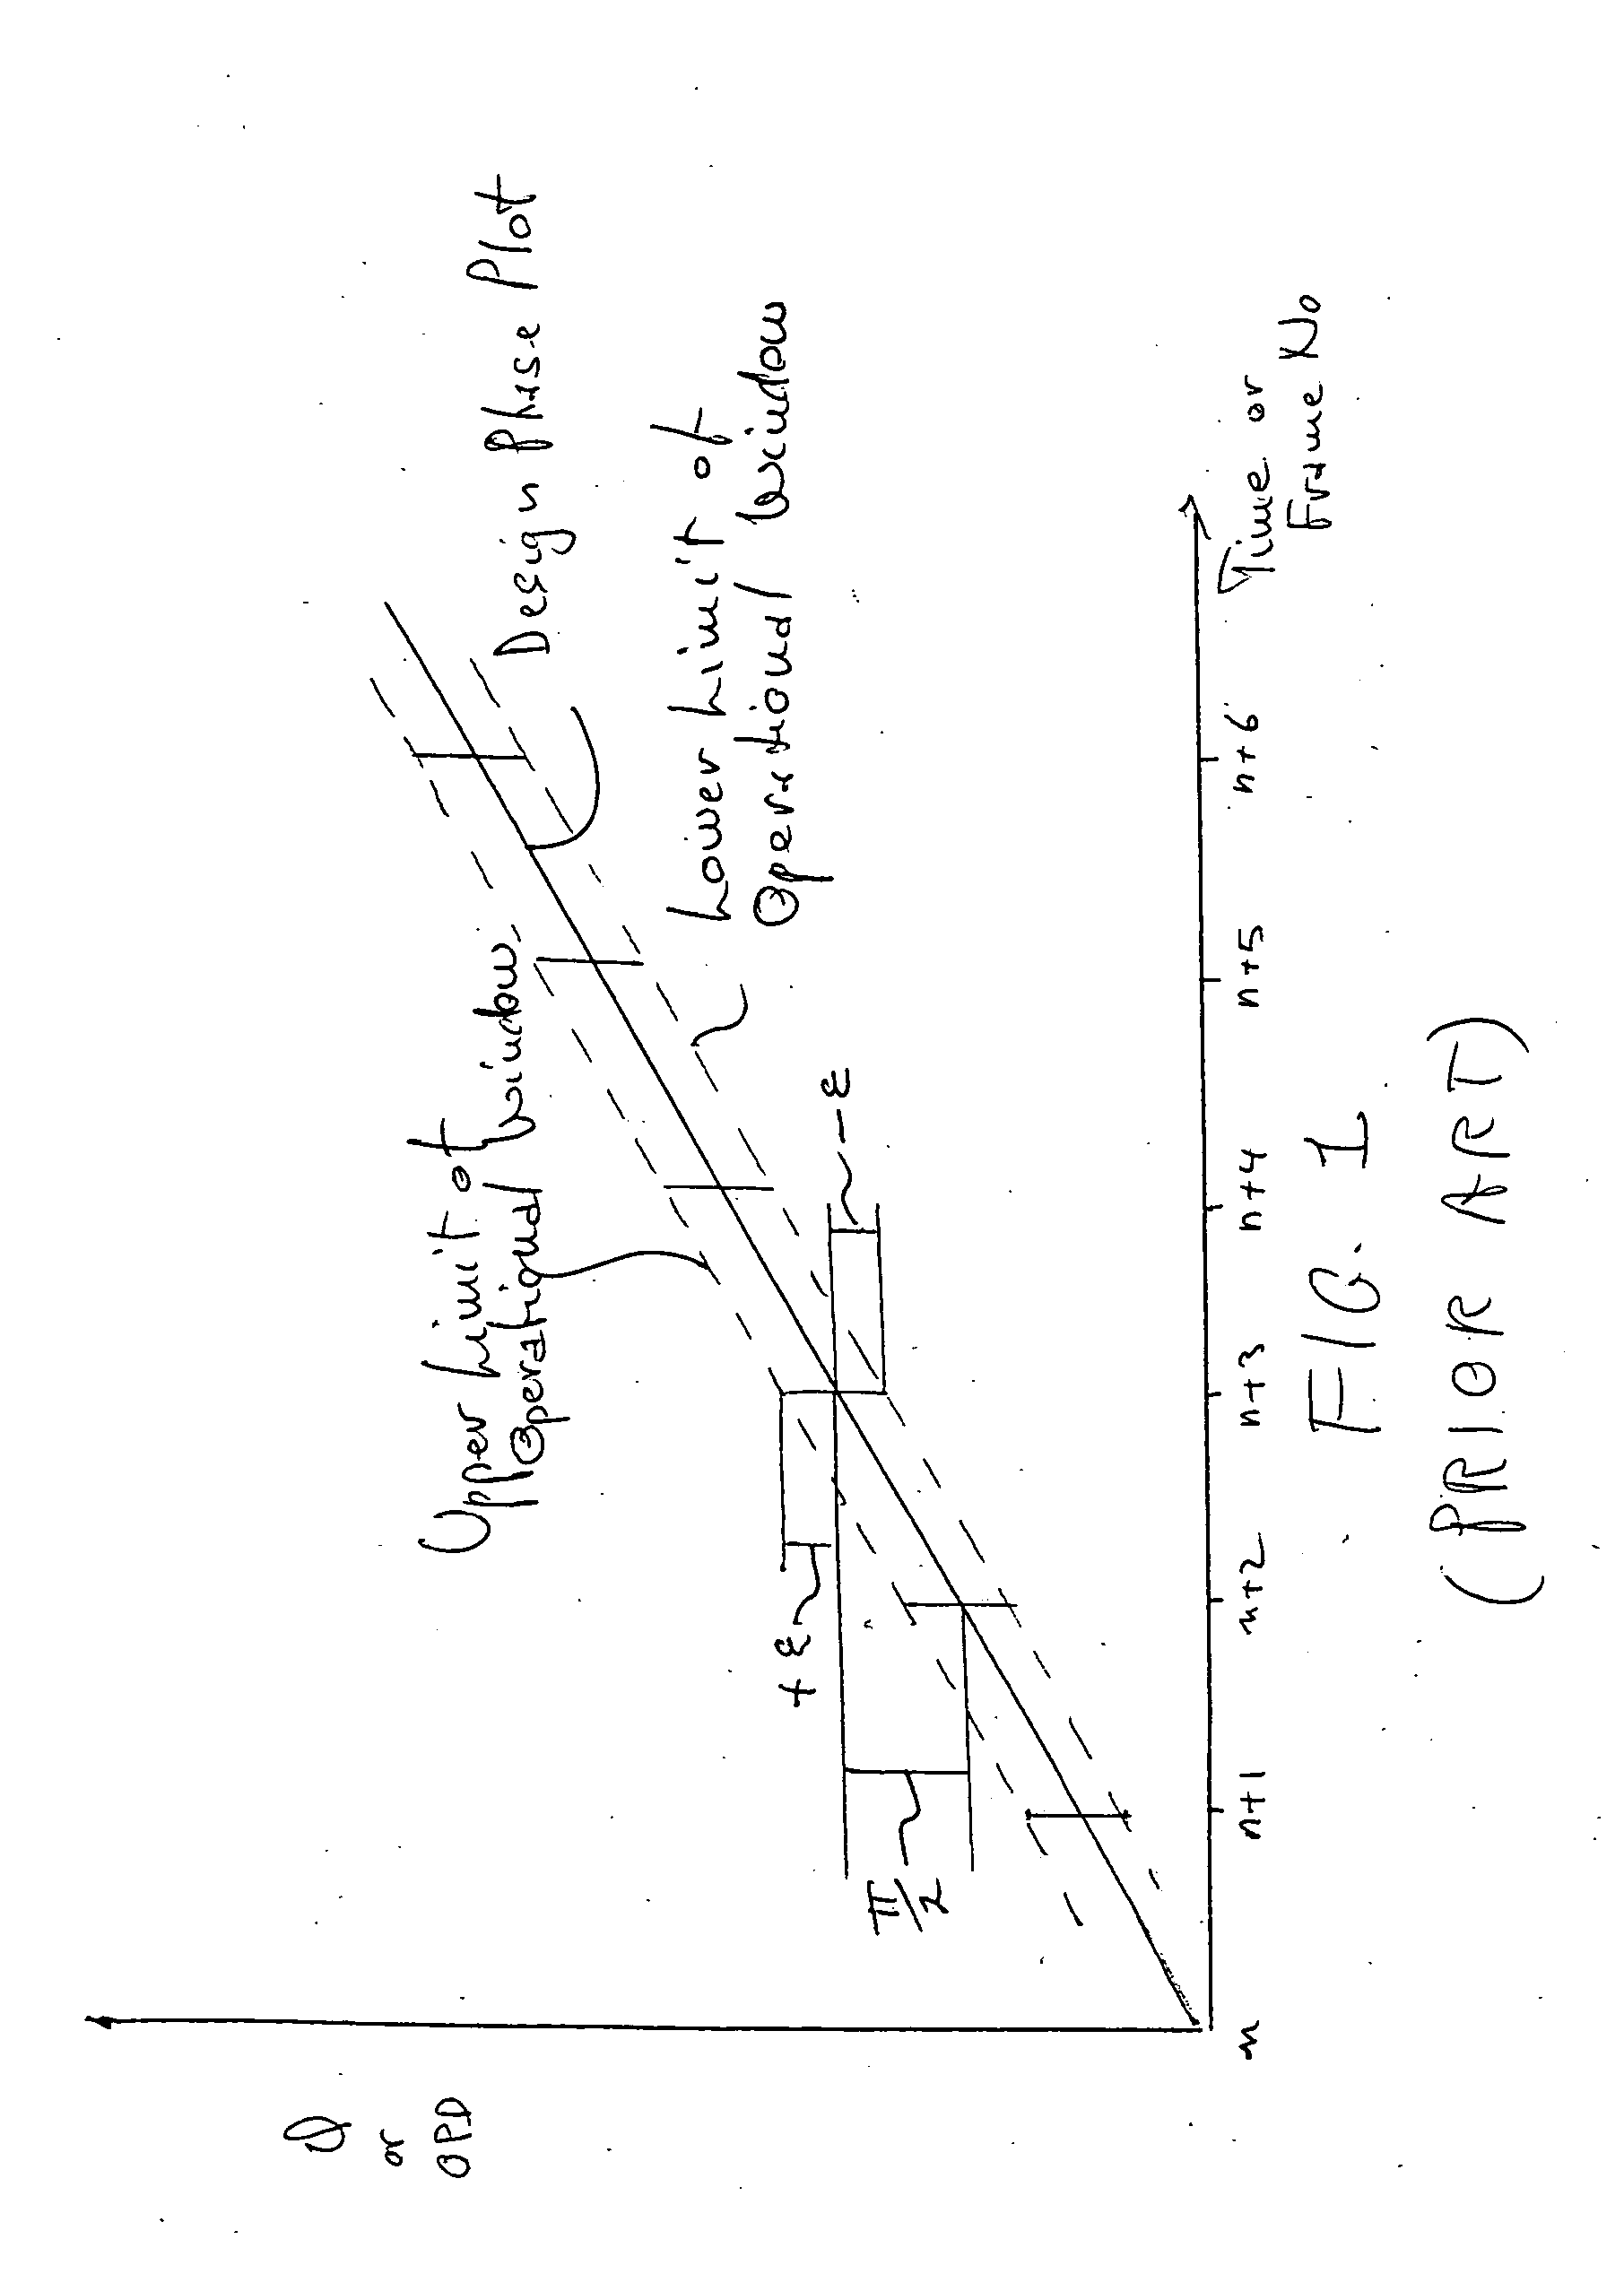 Measurement of object deformation with optical profiler